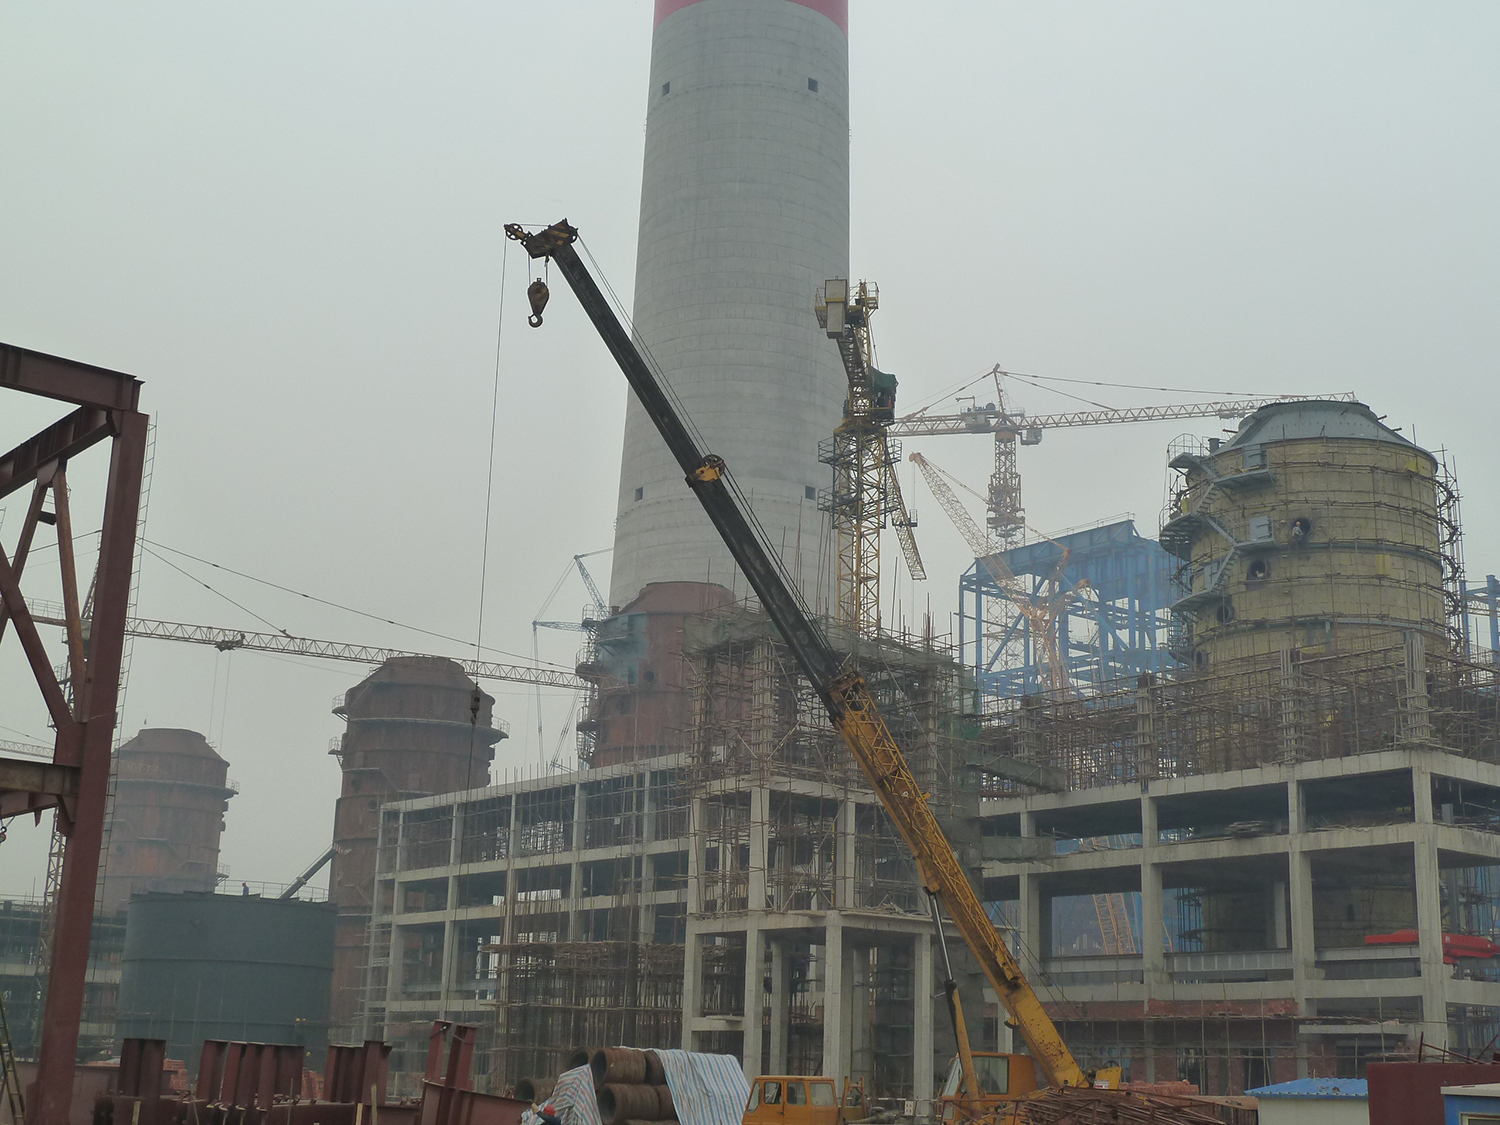 Shandong Zouping Gaoxin aAluminum-electricity Co., Ltd. Changshan Thermal Power Plant 